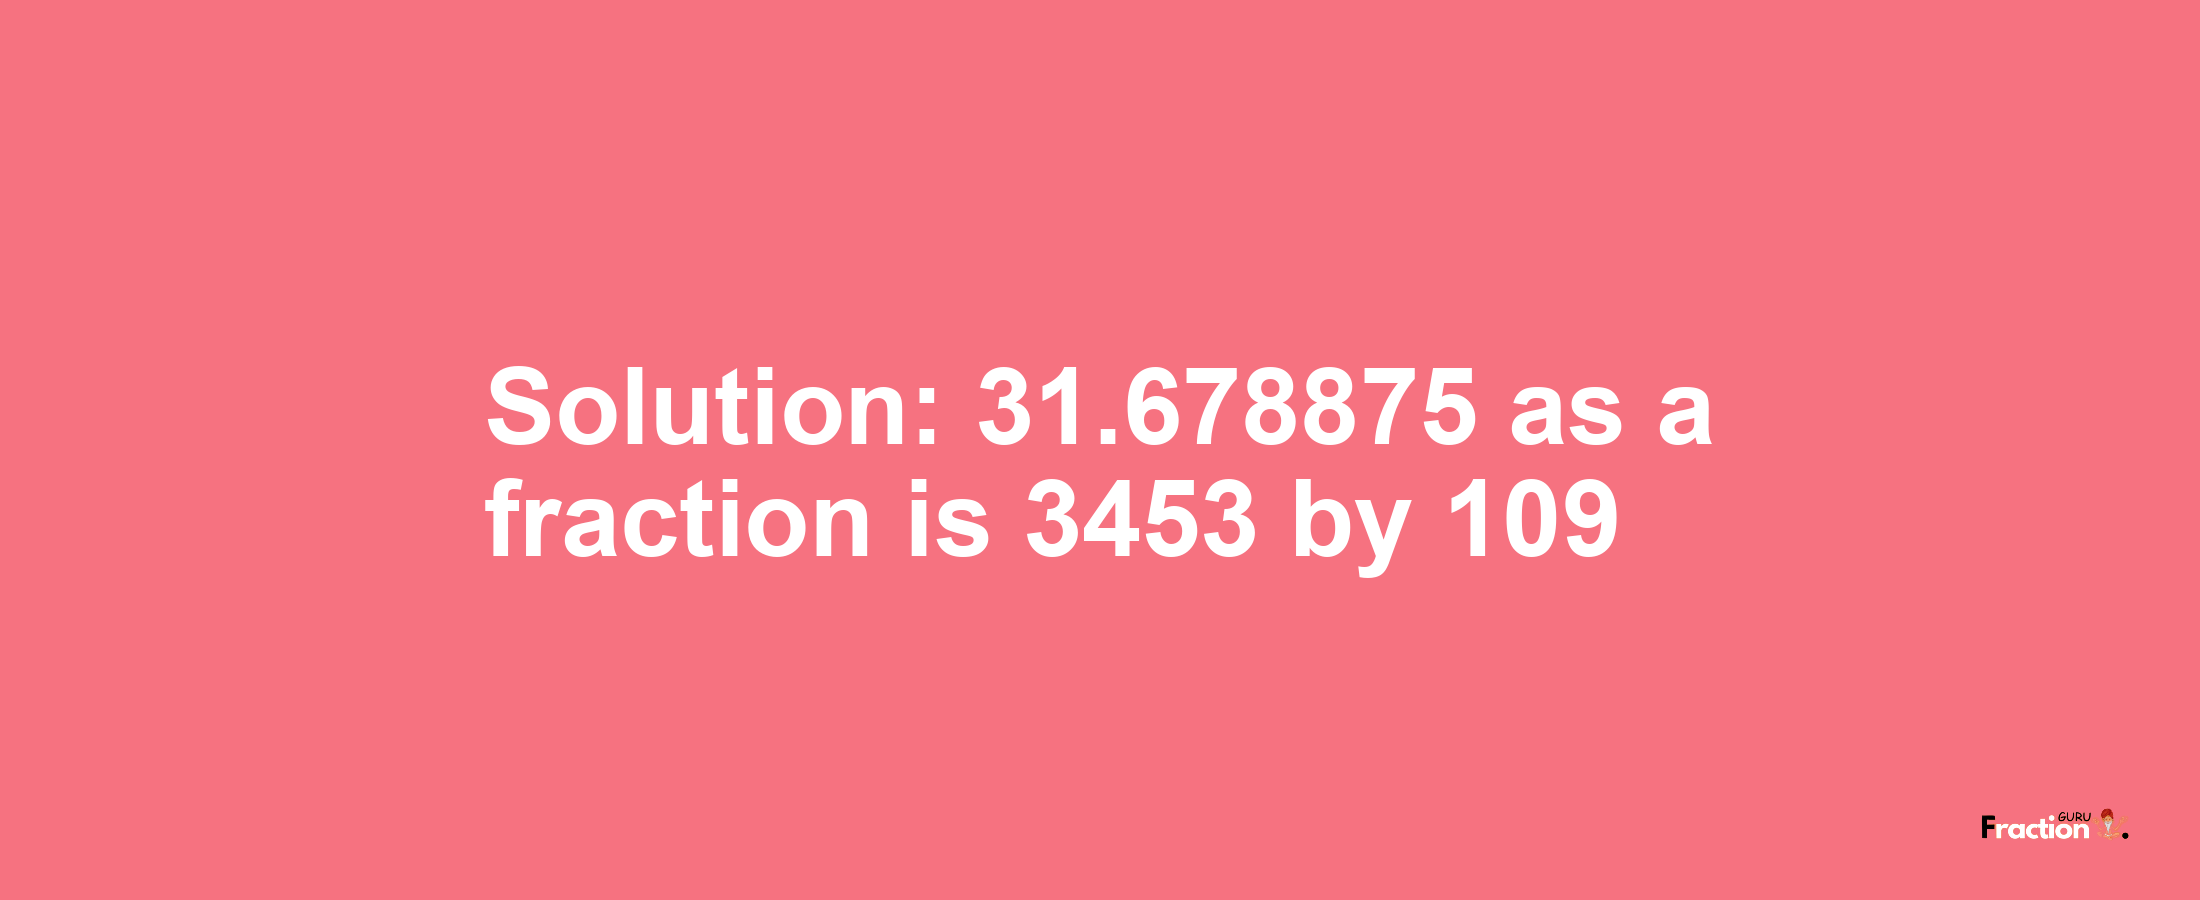 Solution:31.678875 as a fraction is 3453/109